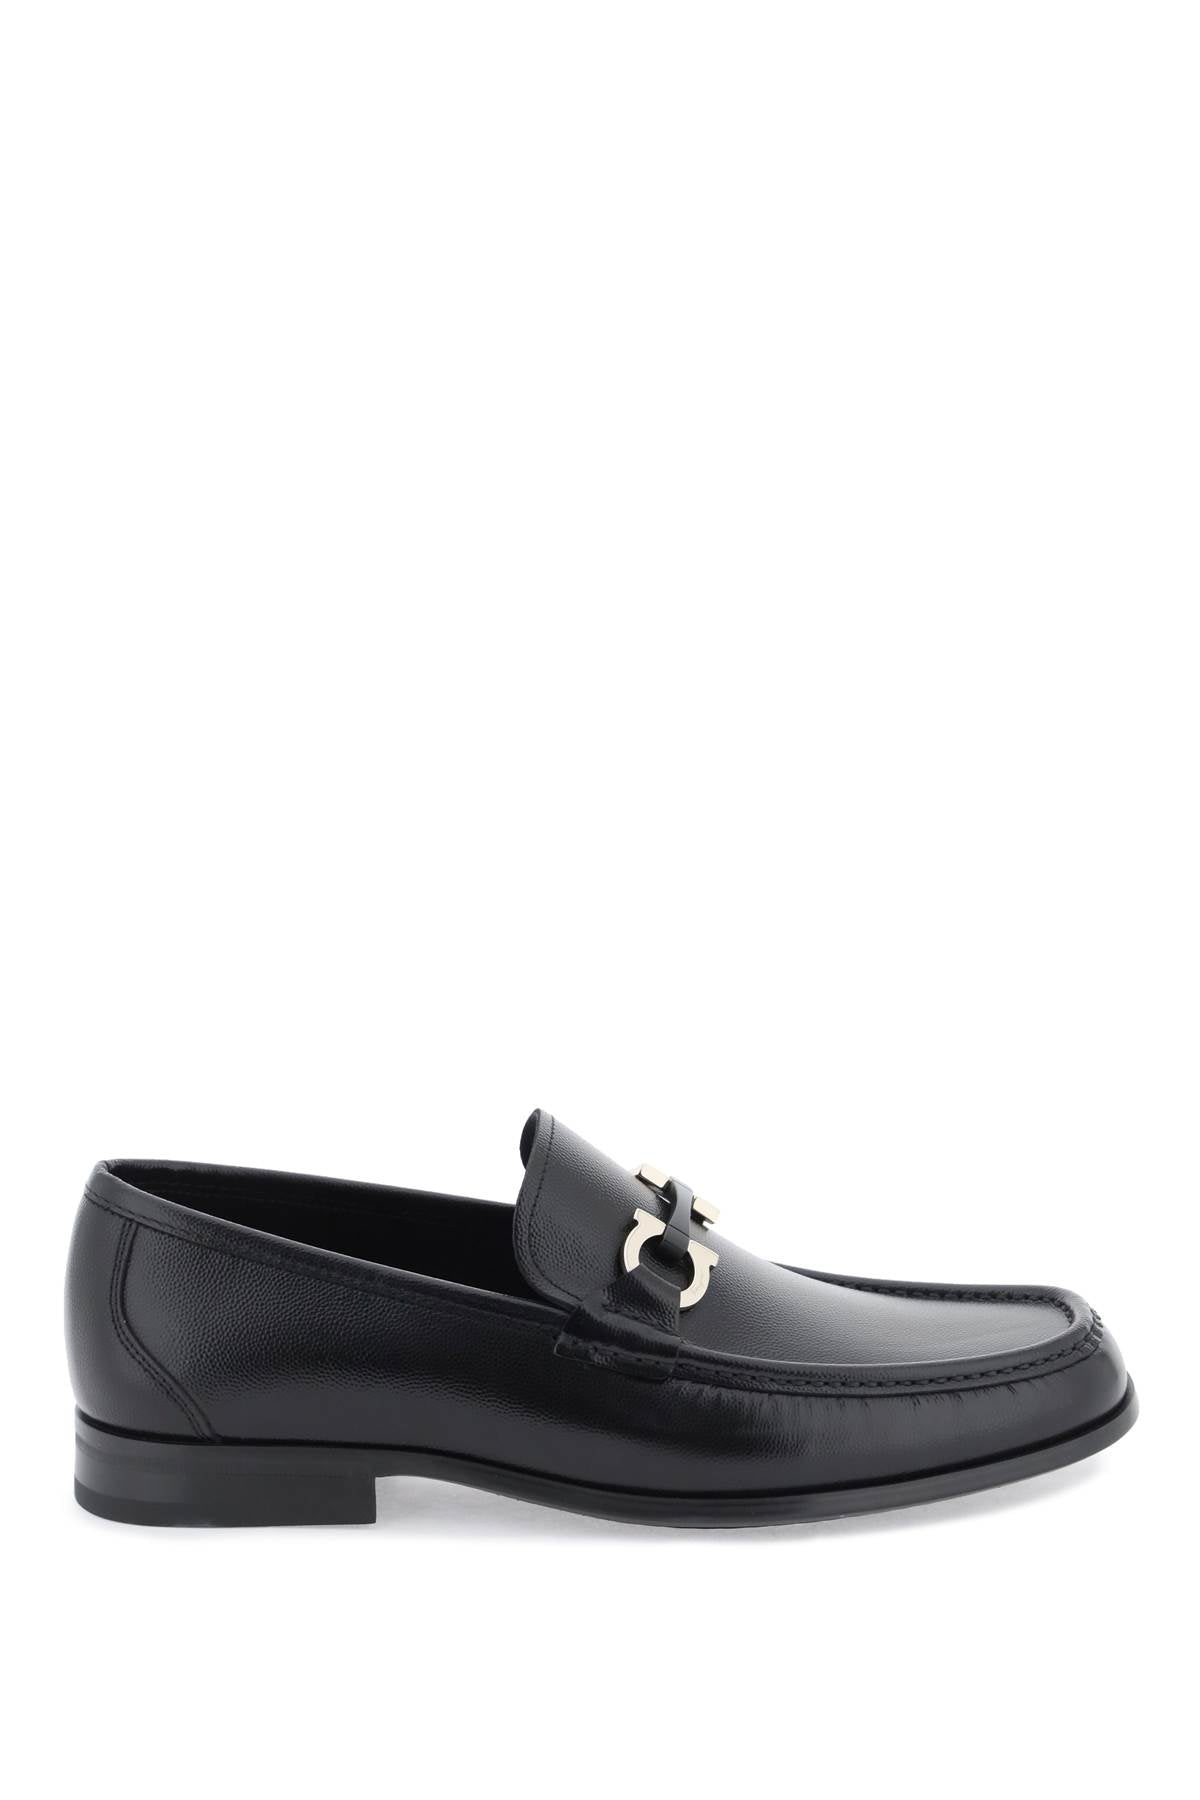 FERRAGAMO Men's Grained Leather Loafers with Gancini Hardware